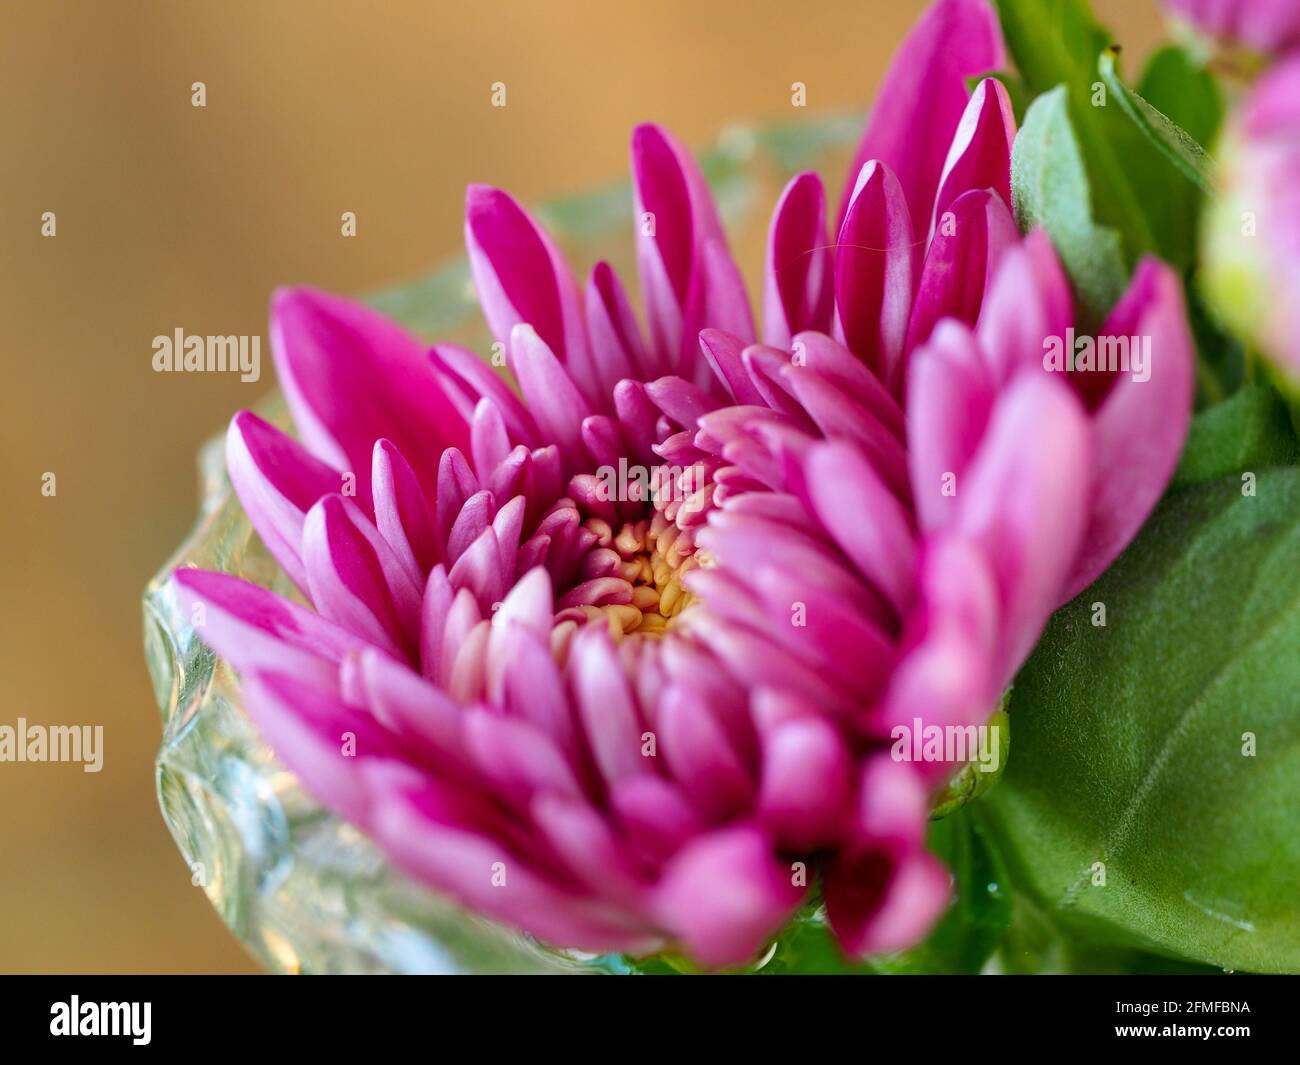 Flowers in a vase, Macro of a Magenta pink Chrysanthemum, Mother’s Day flower opening in a crystal vase Stock Photo